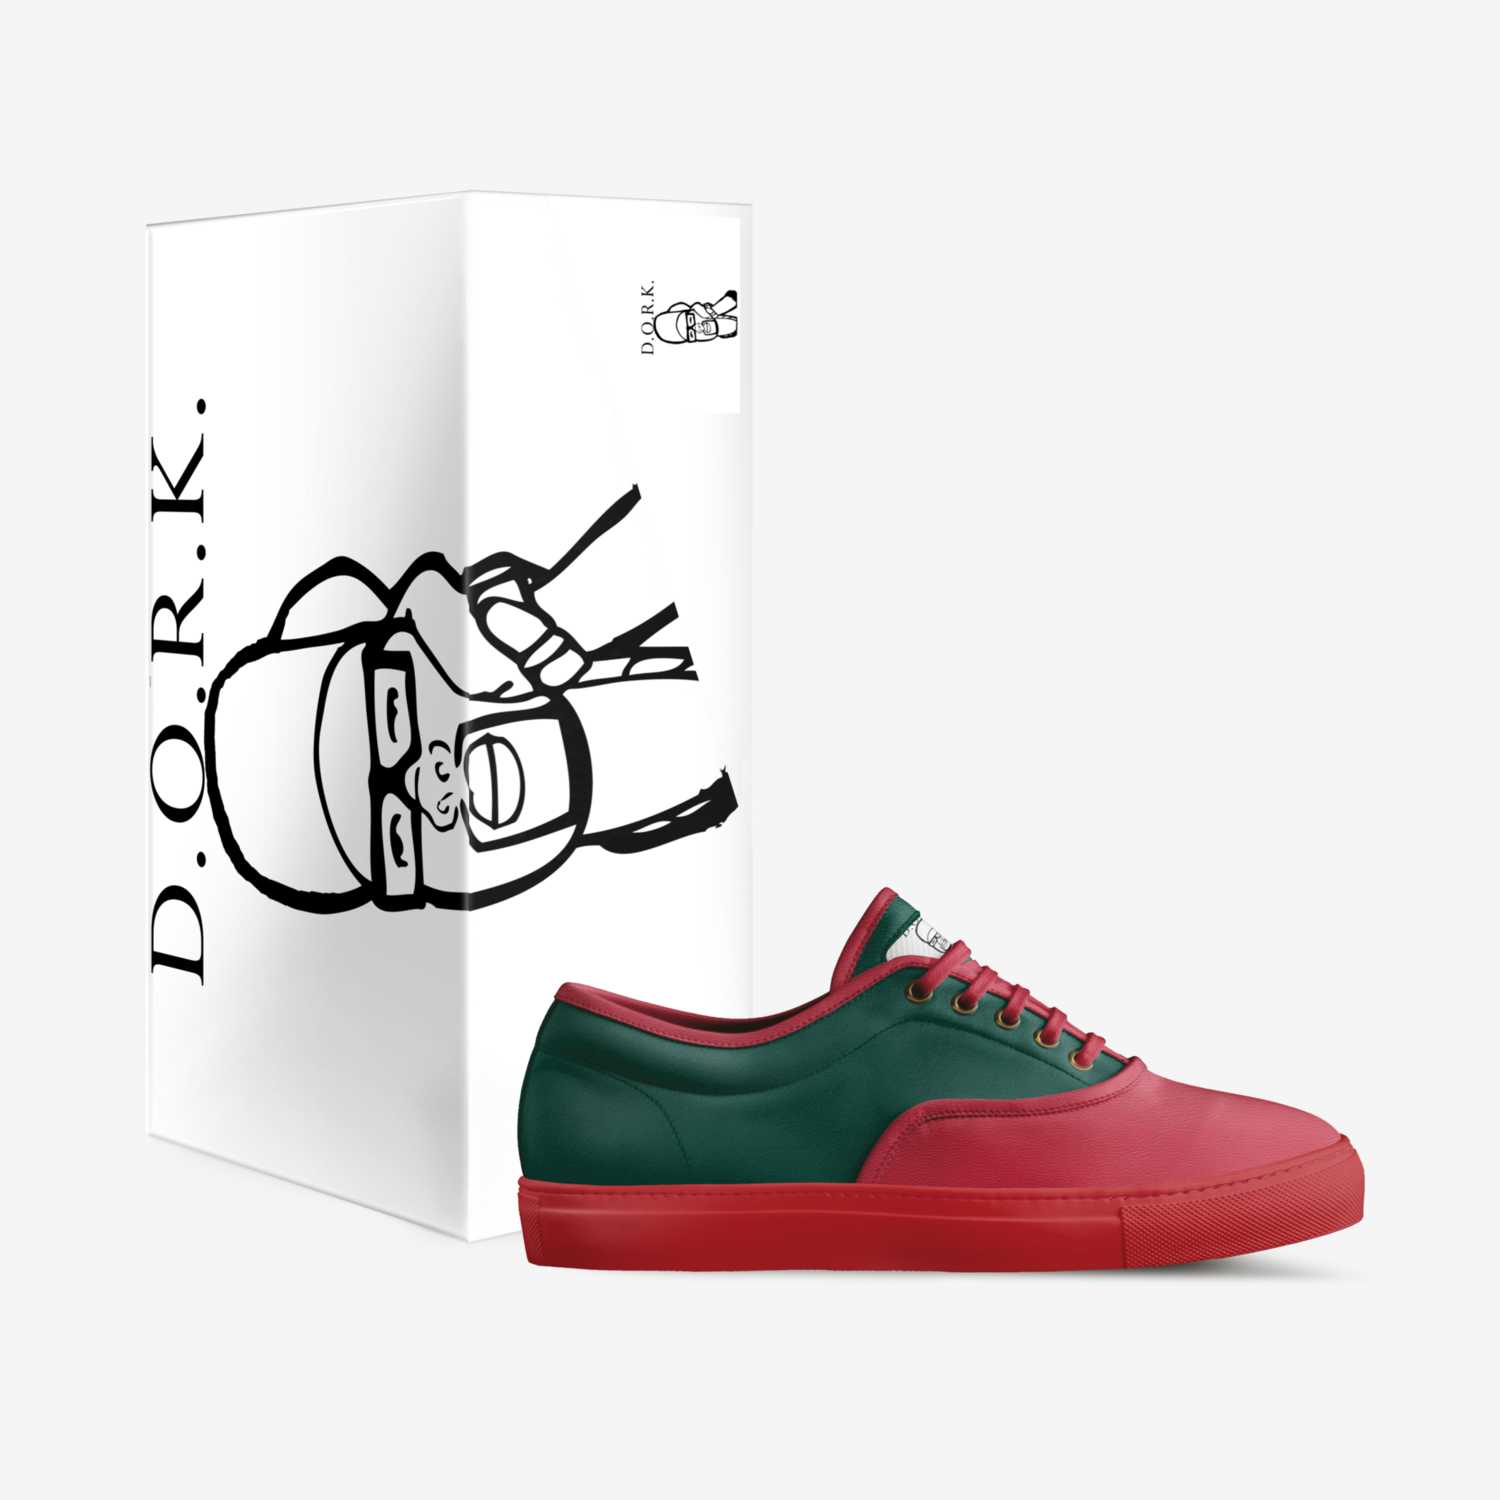 D.O.R.K. custom made in Italy shoes by Brandon Slaughter | Box view